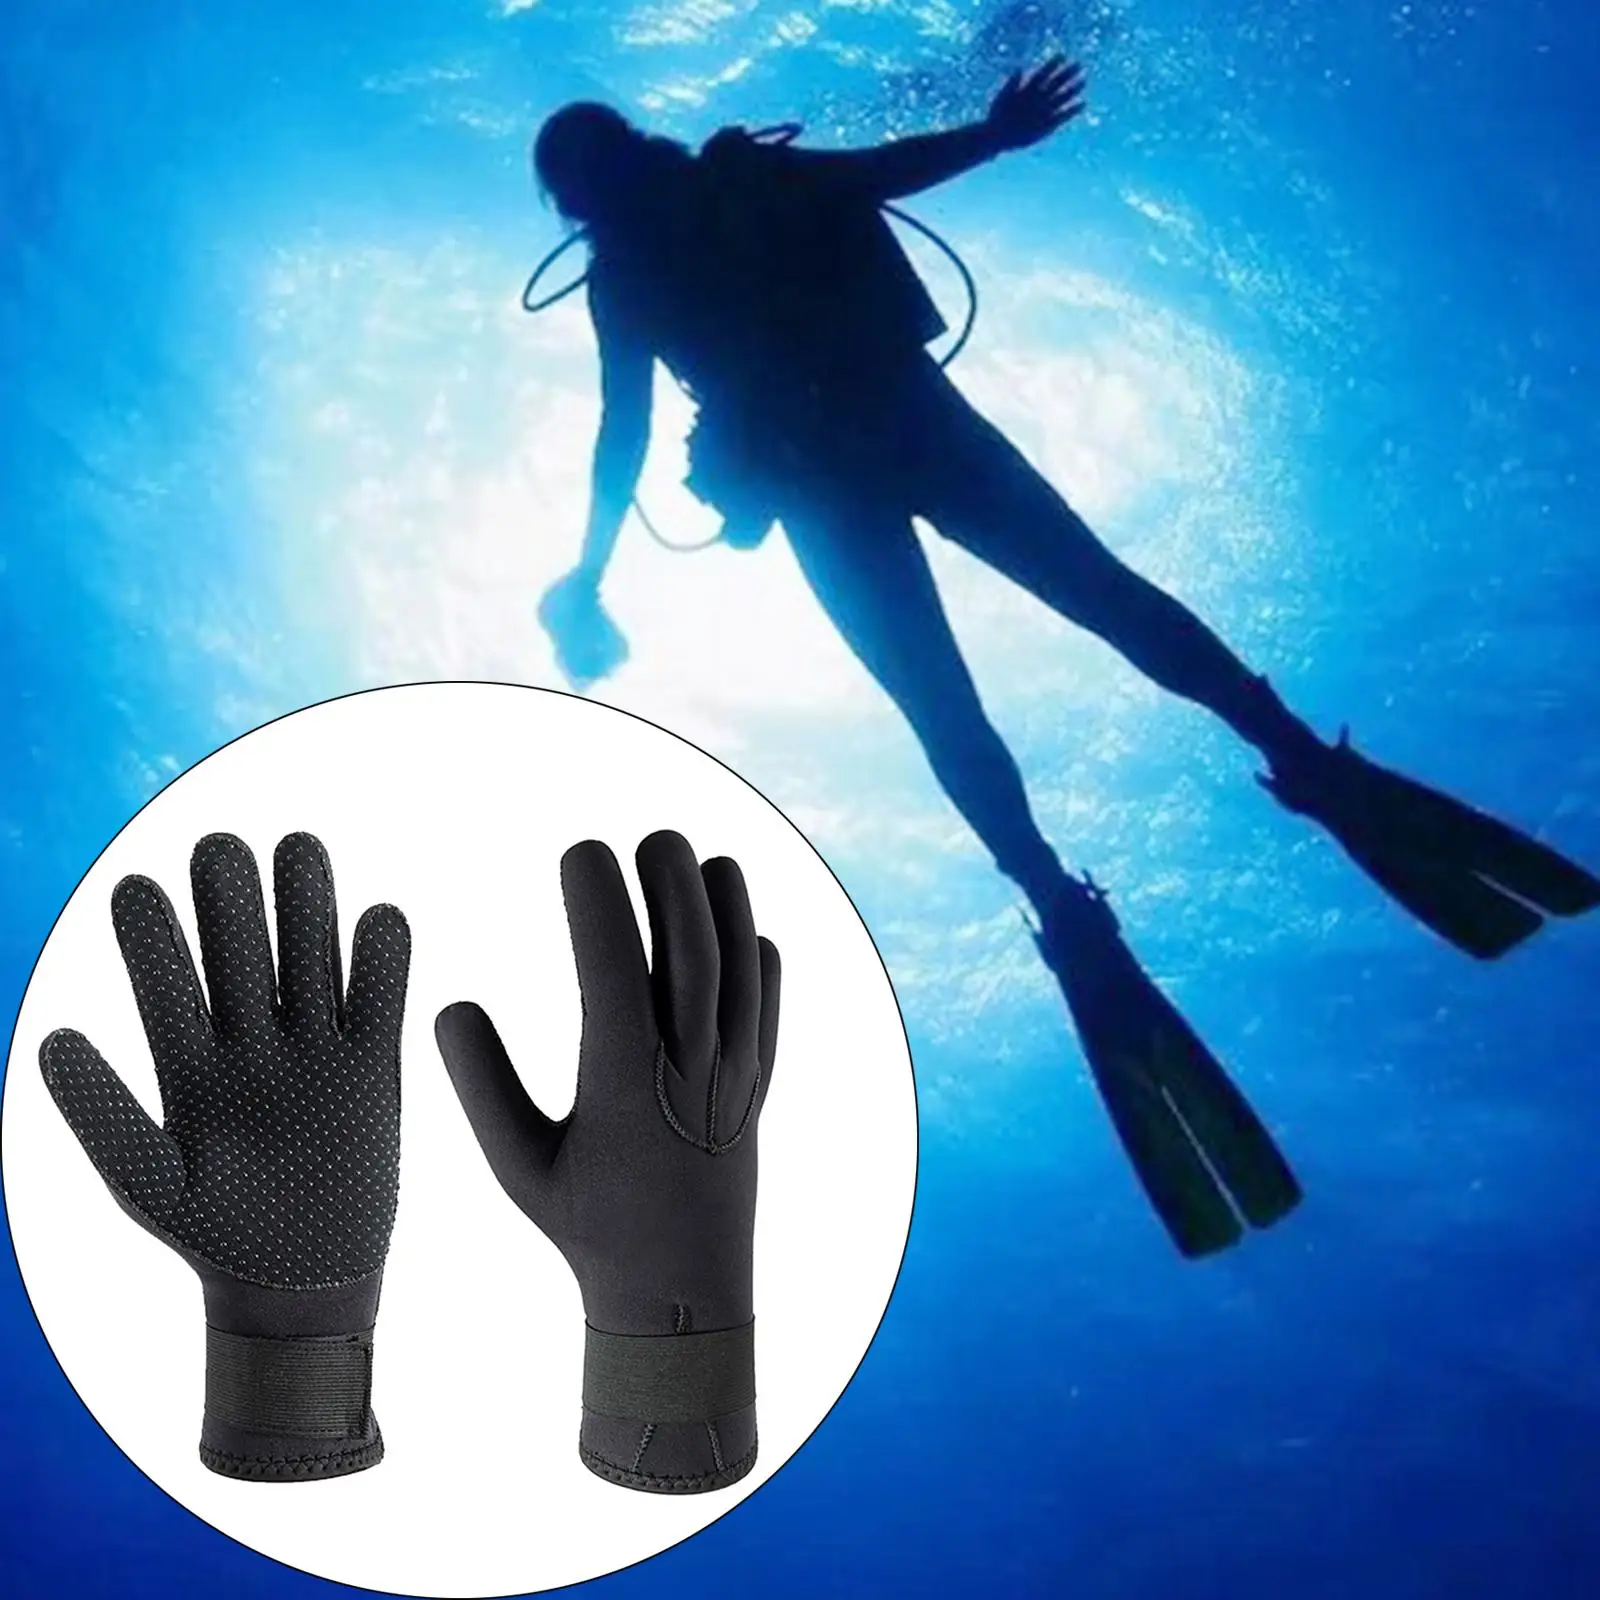 Diving Gloves Neoprene, Wetsuits Five s, 3MM Anti Slip Gloves for Snorkeling Surfing Sailing Kayaking Diving Spearfishing